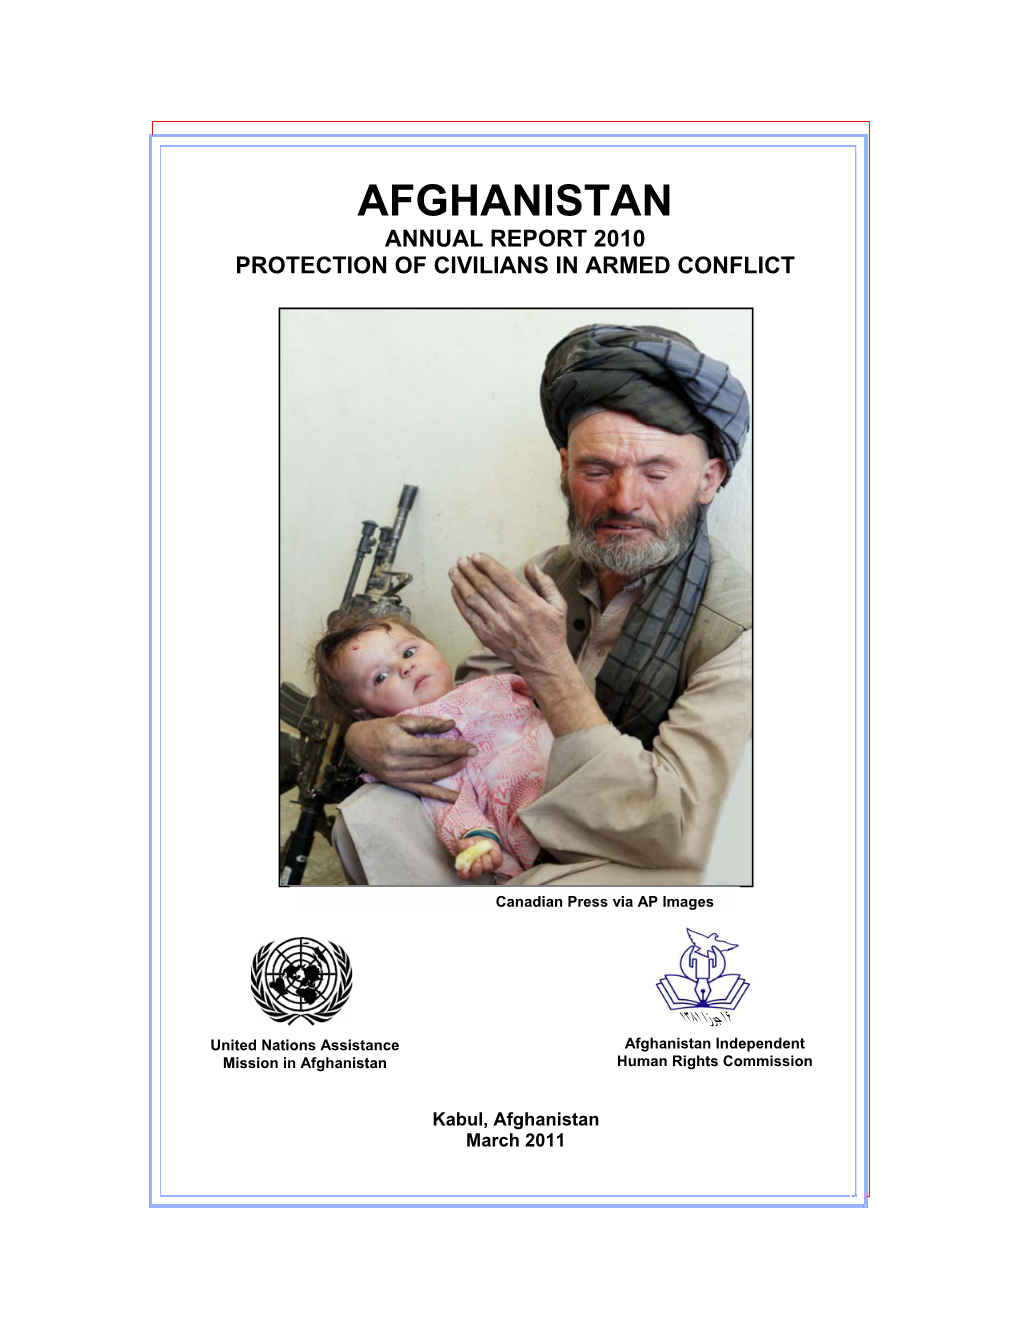 Afghanistan Annual Report on Protection of Civilians in Armed Conflict, 2010